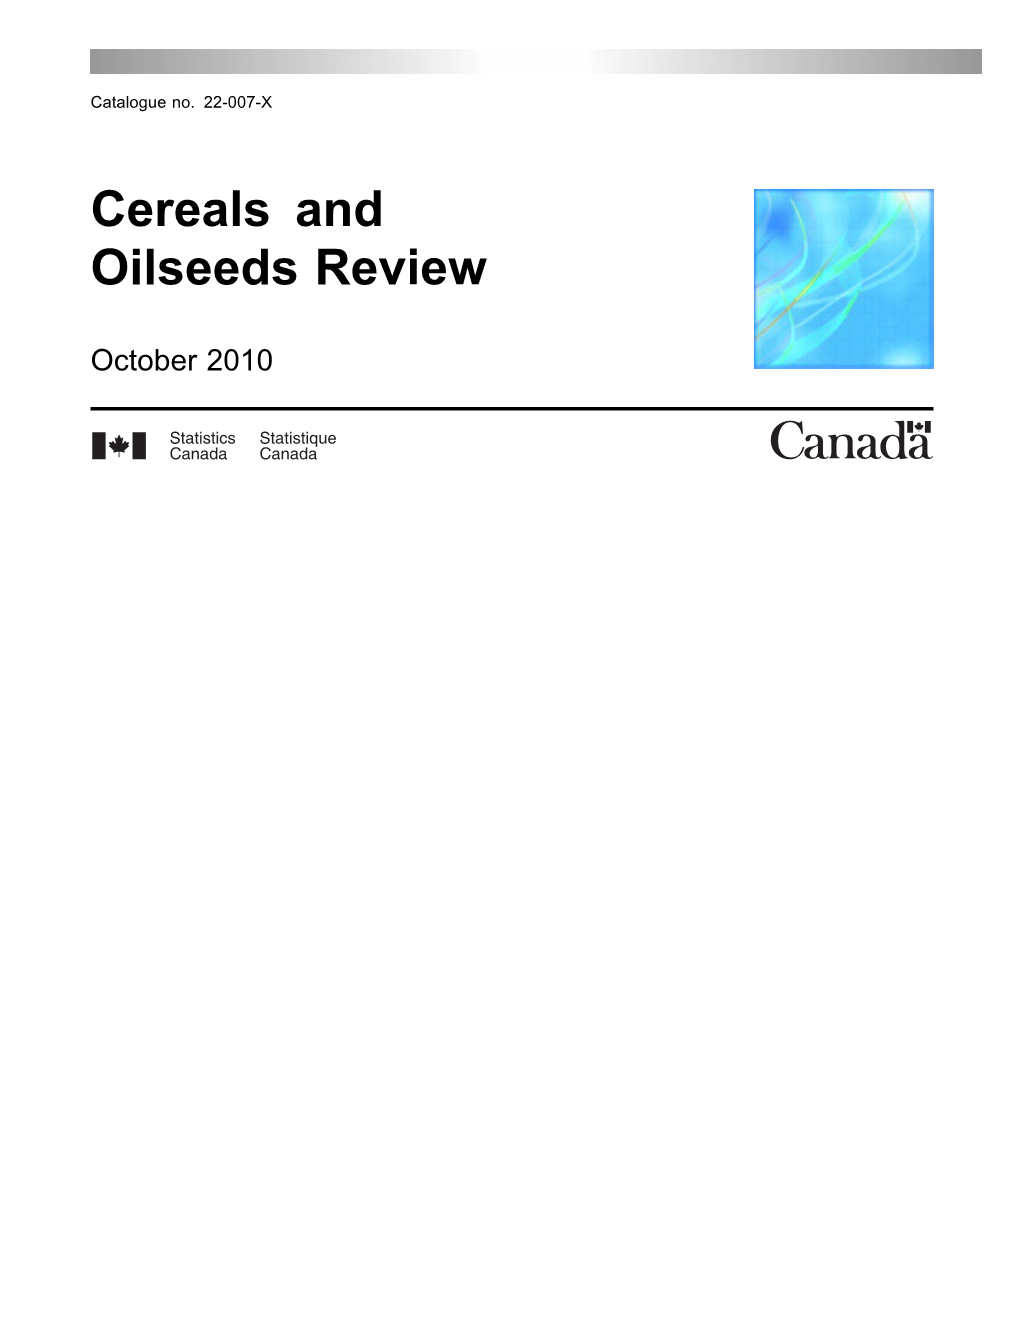 Cereals and Oilseeds Review